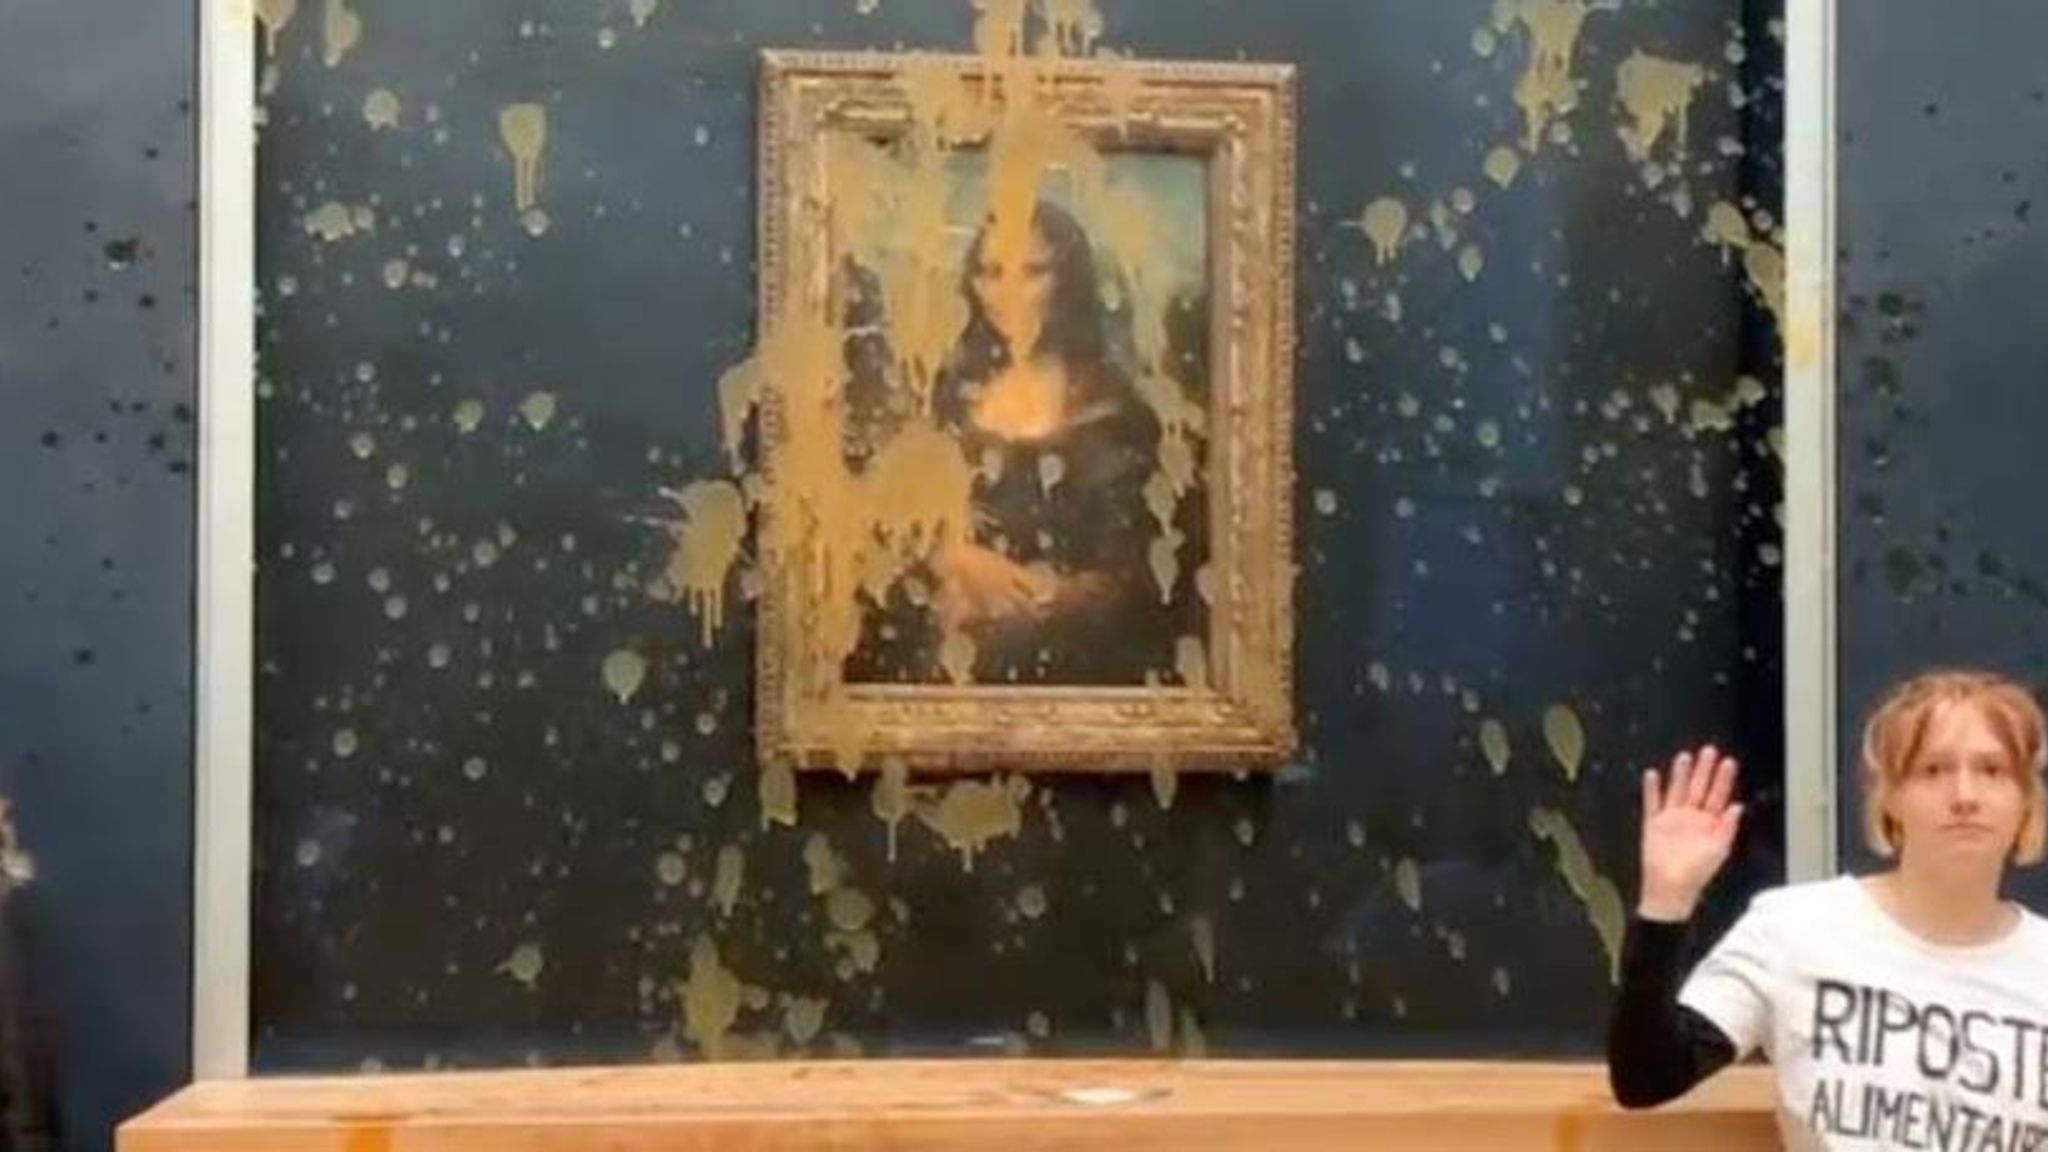 Inshorts Man dressed as elderly woman throws cake at Mona Lisa painting in  Paris A man disguised as a wheelchair-bound elderly lady lunged and threw  cake at the Mona Lisa painting, which